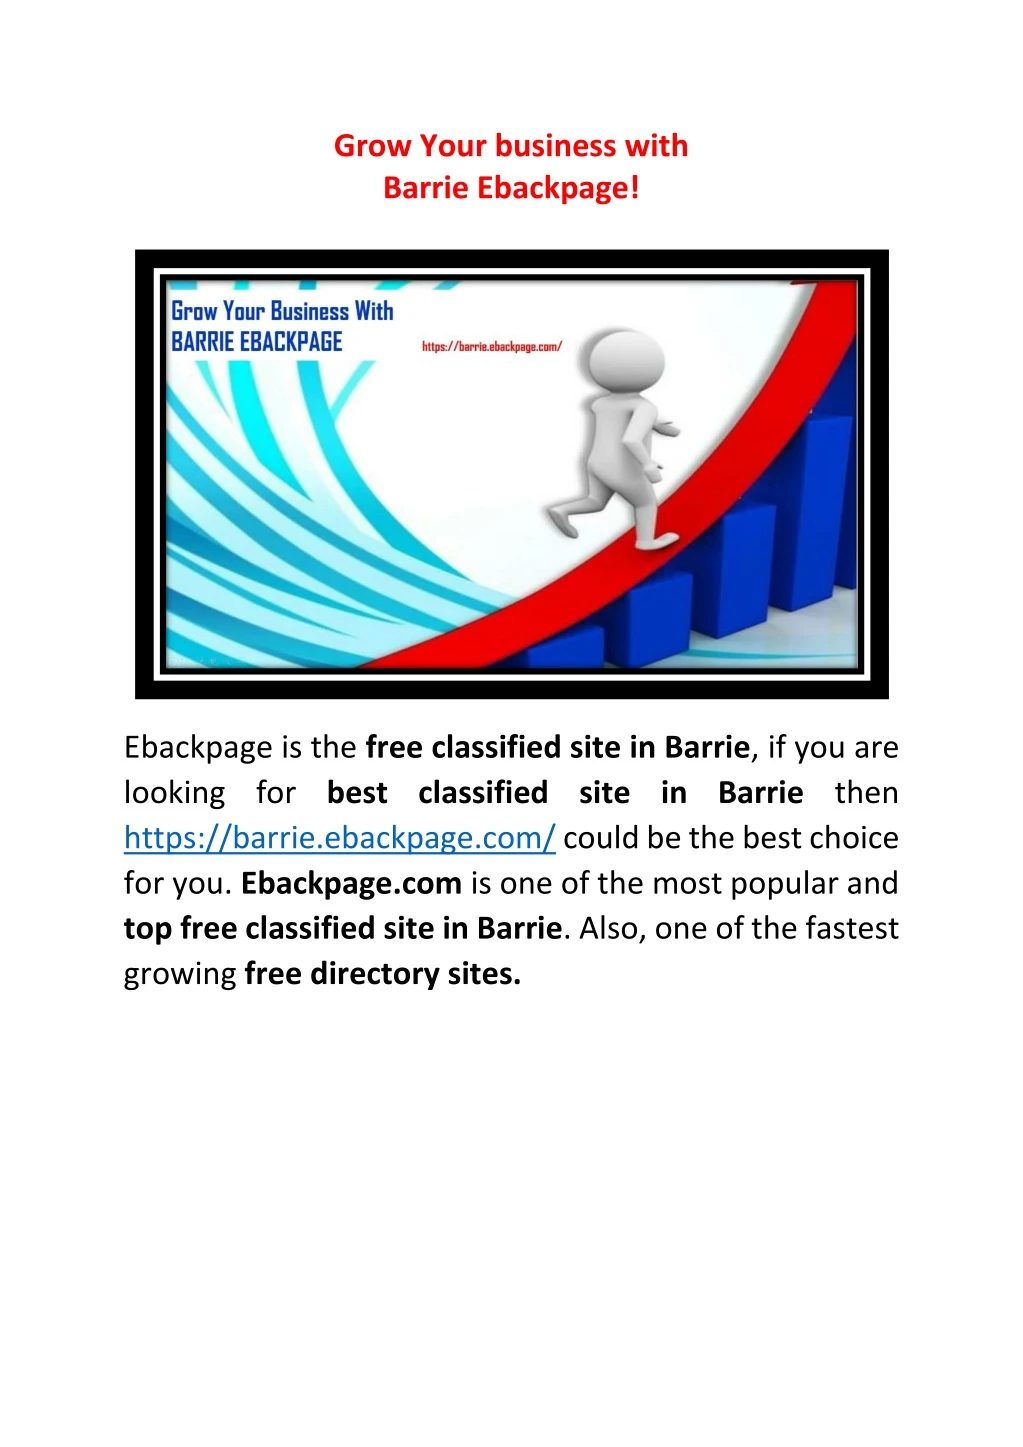 grow your business with barrie ebackpage n.